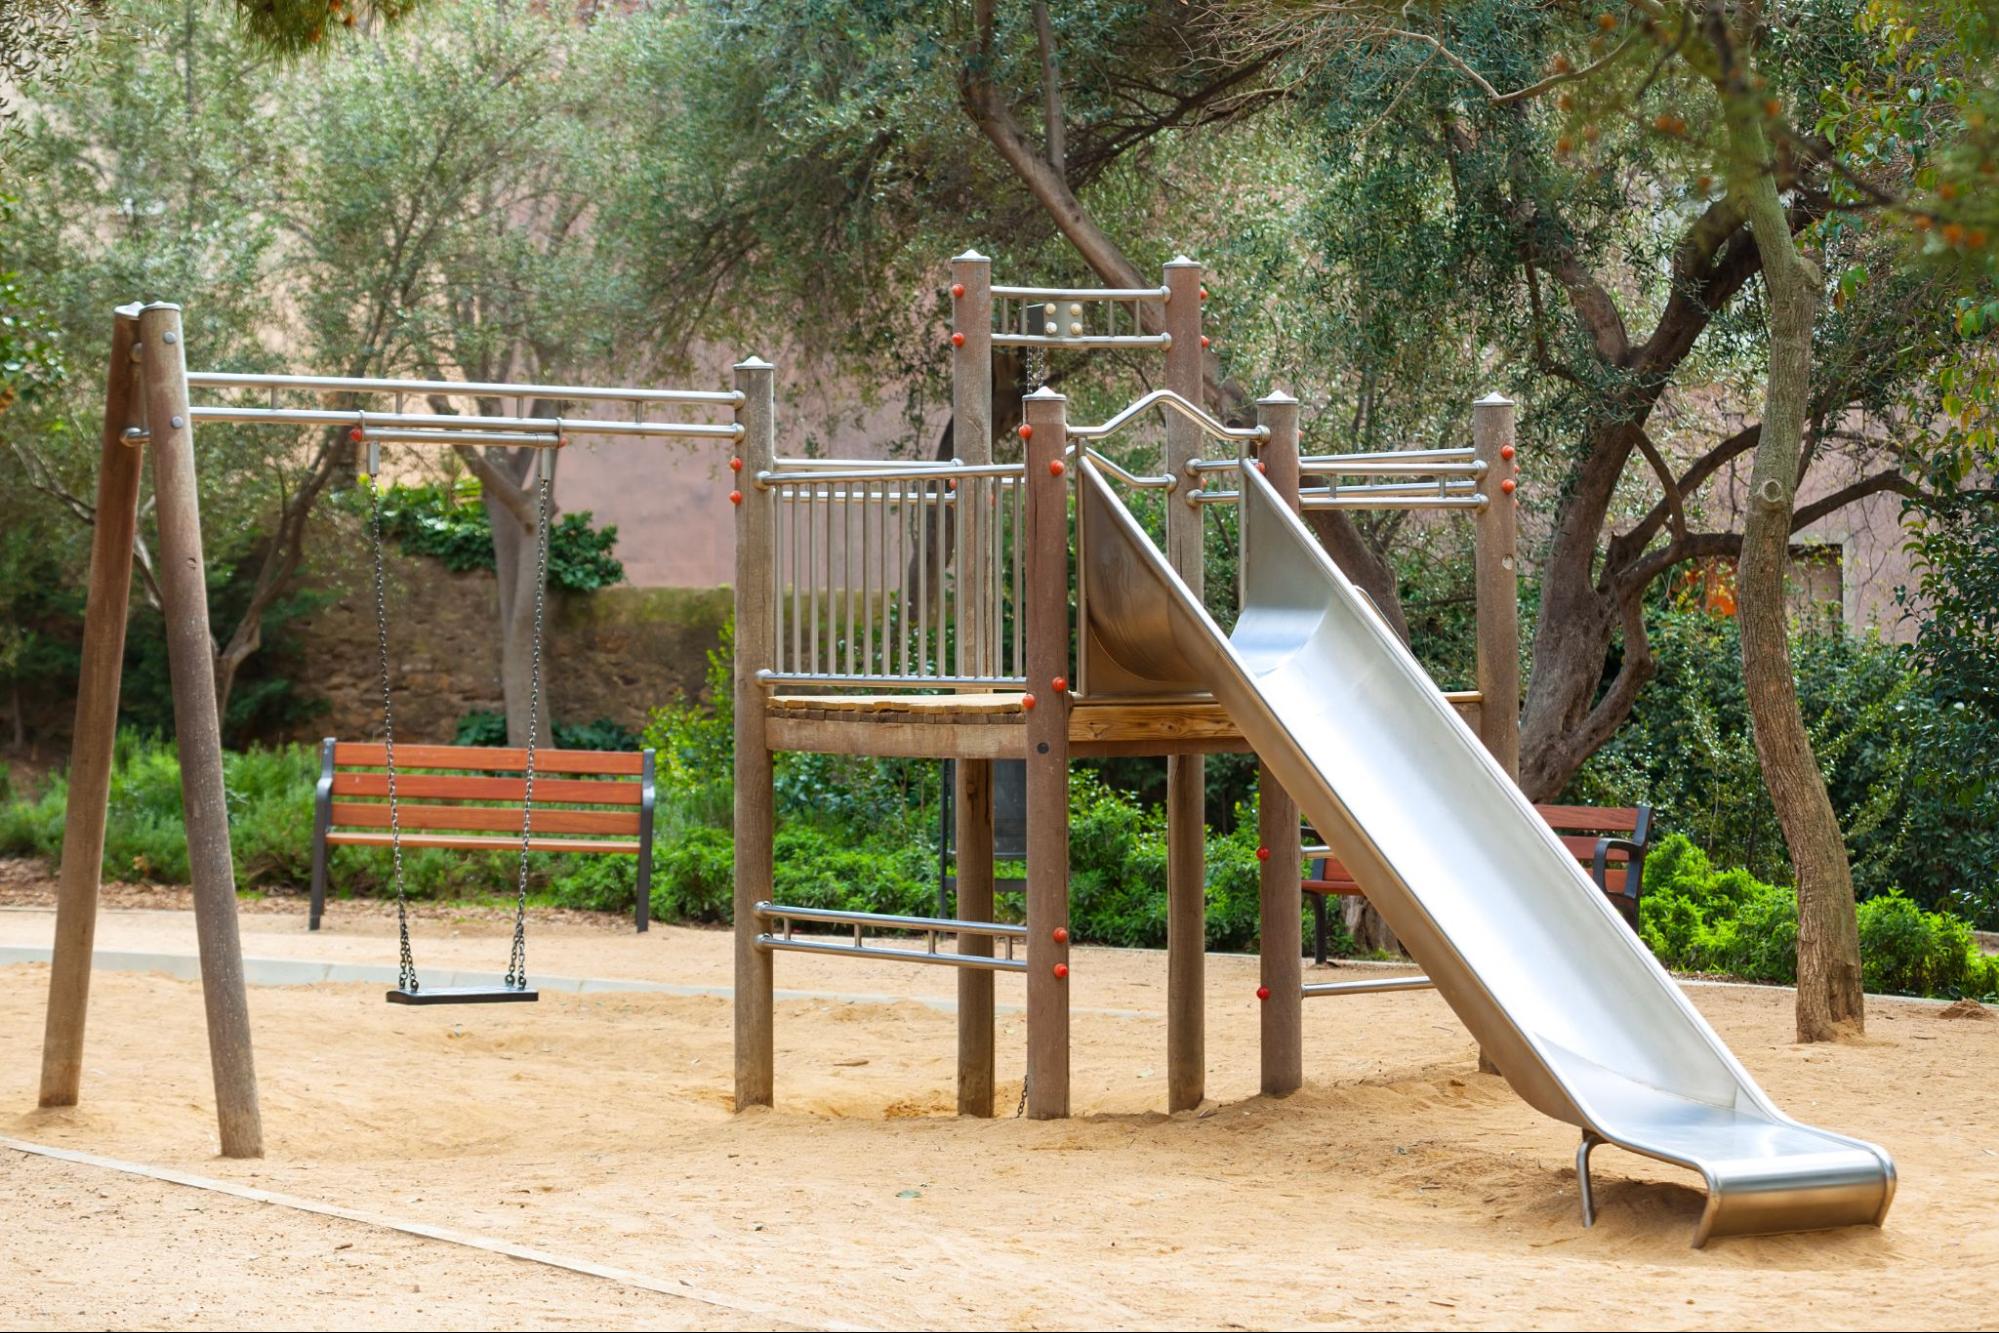 Metal slides can cause burns and should be replaced with safe playground materials like plastic.